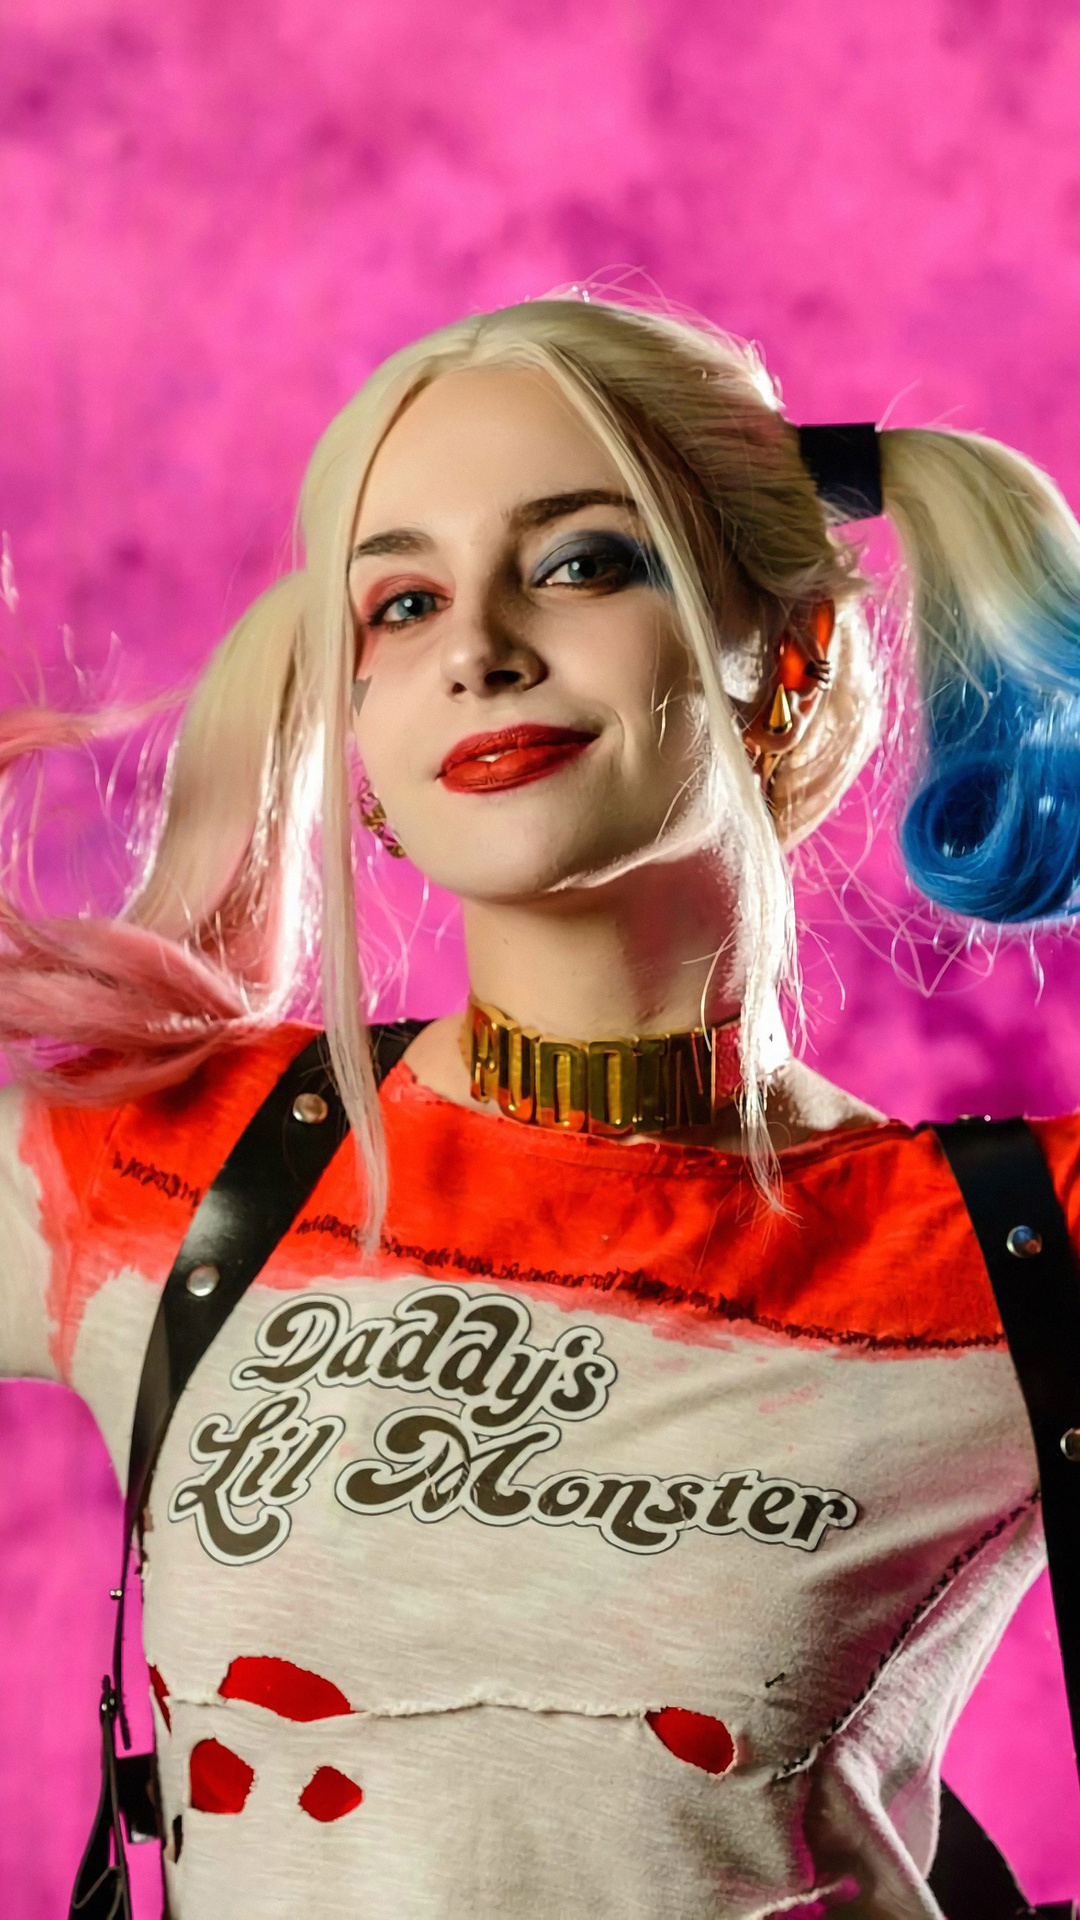 1080x1920 Harley Quinn Cosplay New 4k Iphone 7,6s,6 Plus, Pixel xl ,One ...